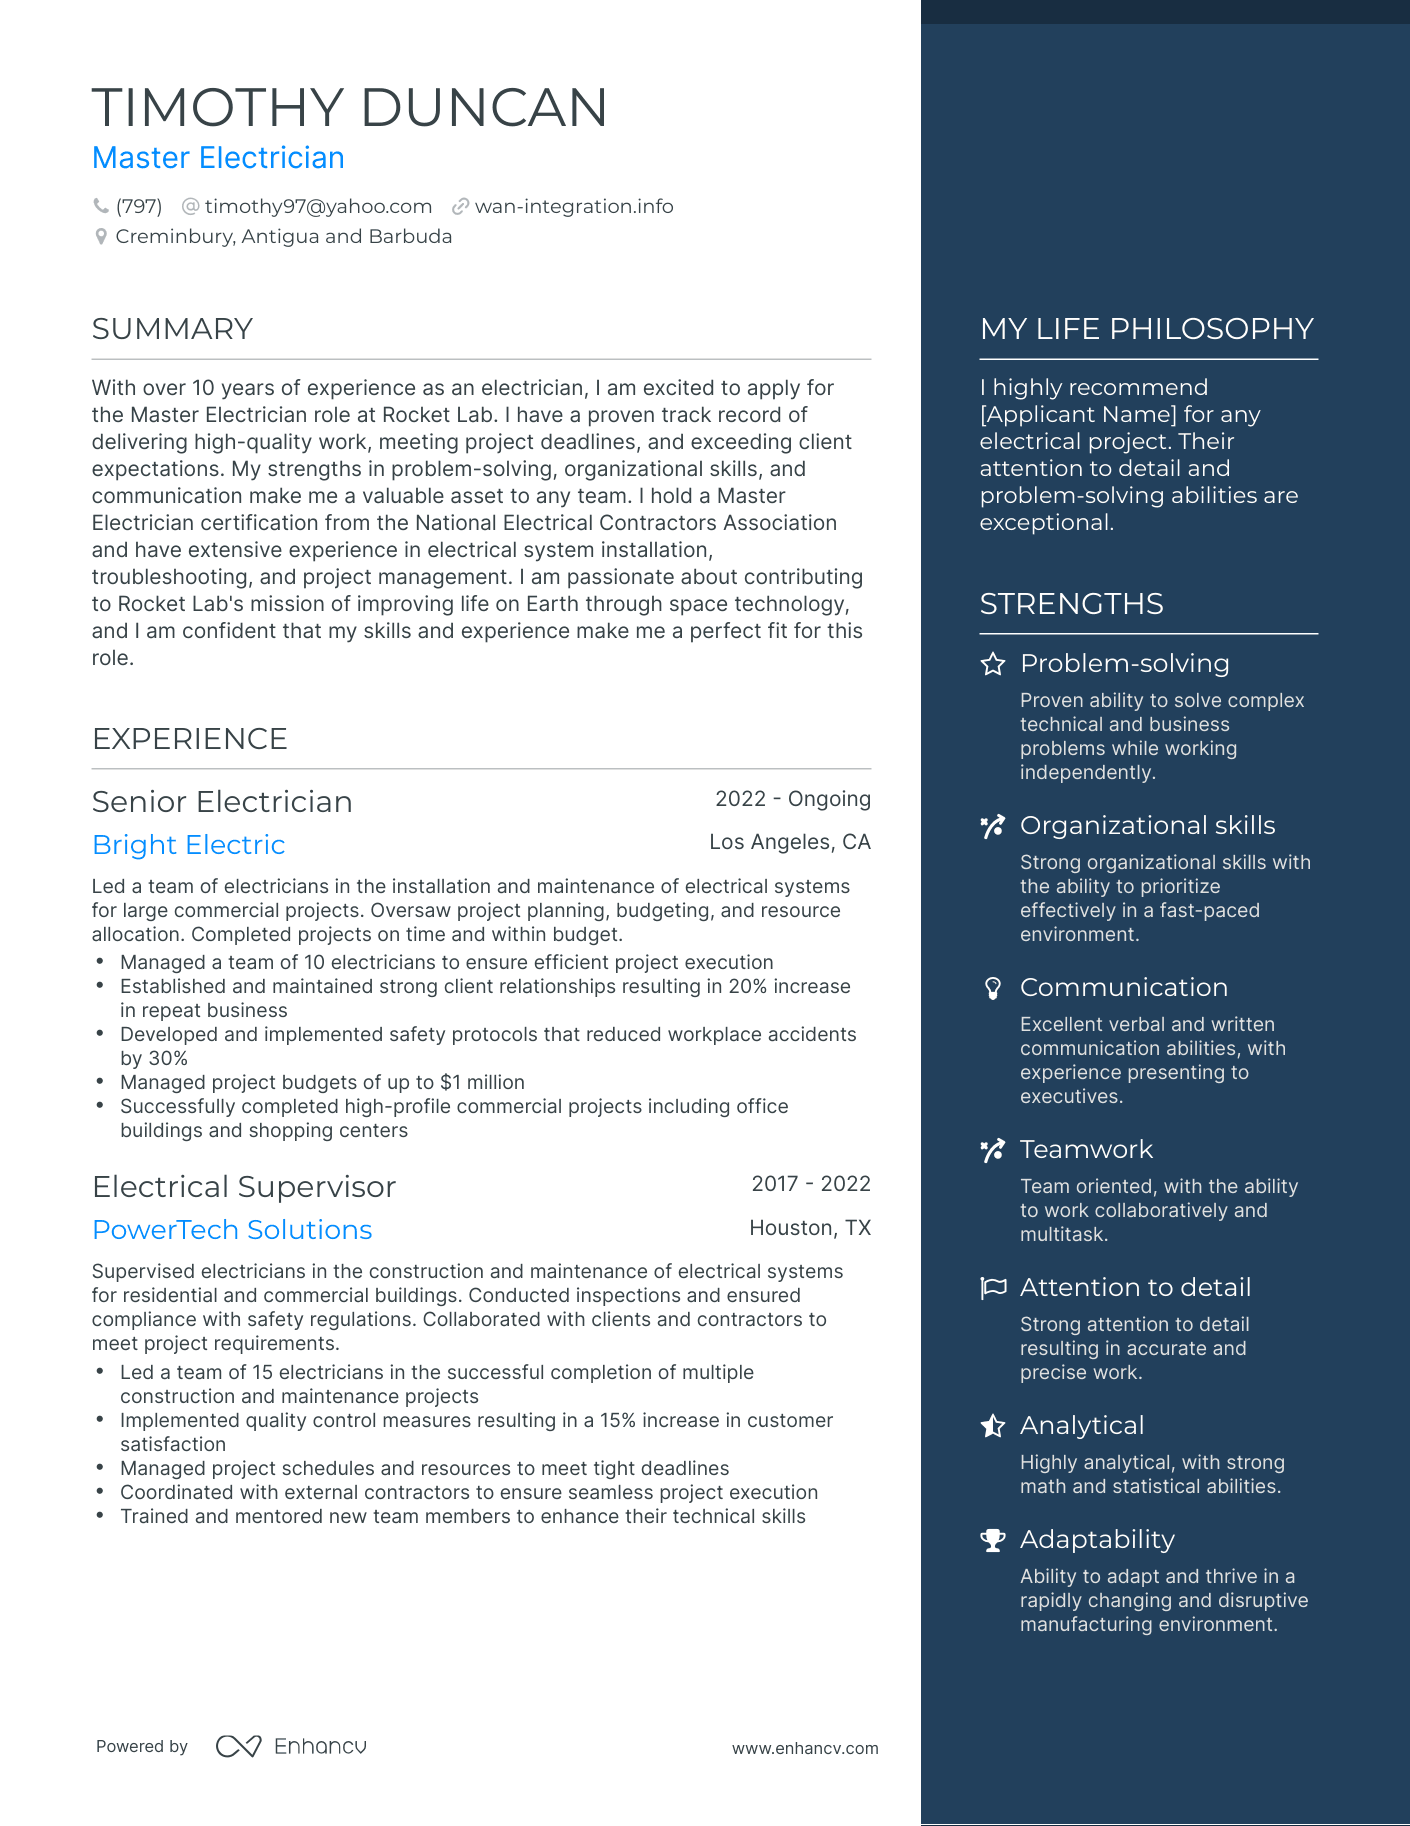 Master Electrician resume example